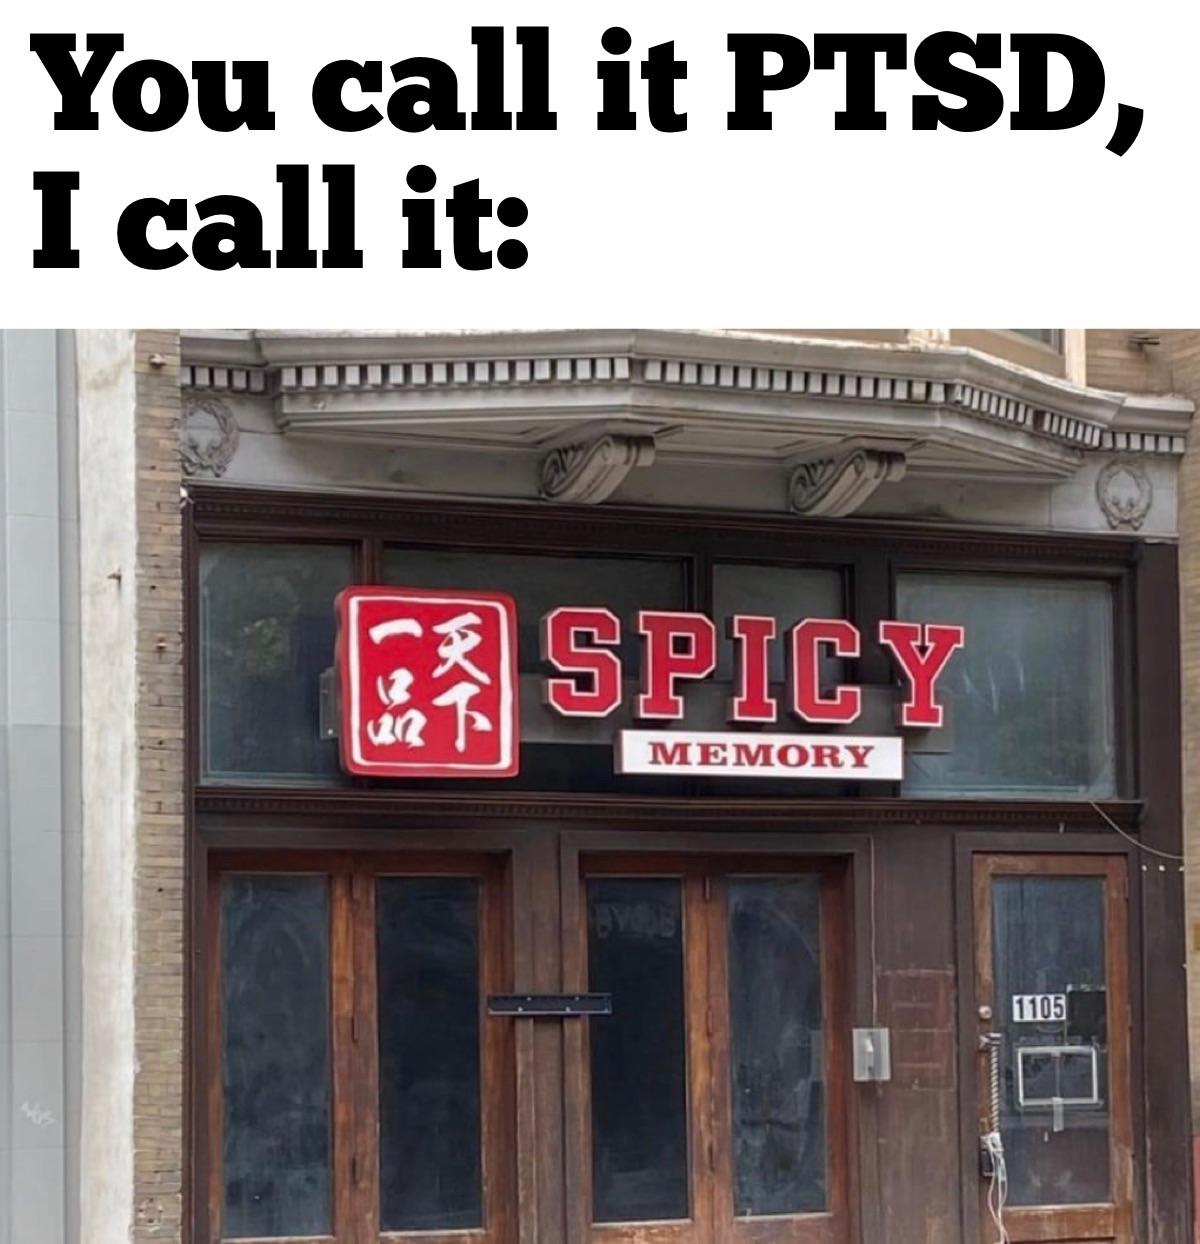 hilarious memes - spicy memory - You call it Ptsd, I call it Spicy 20 Memory 1105